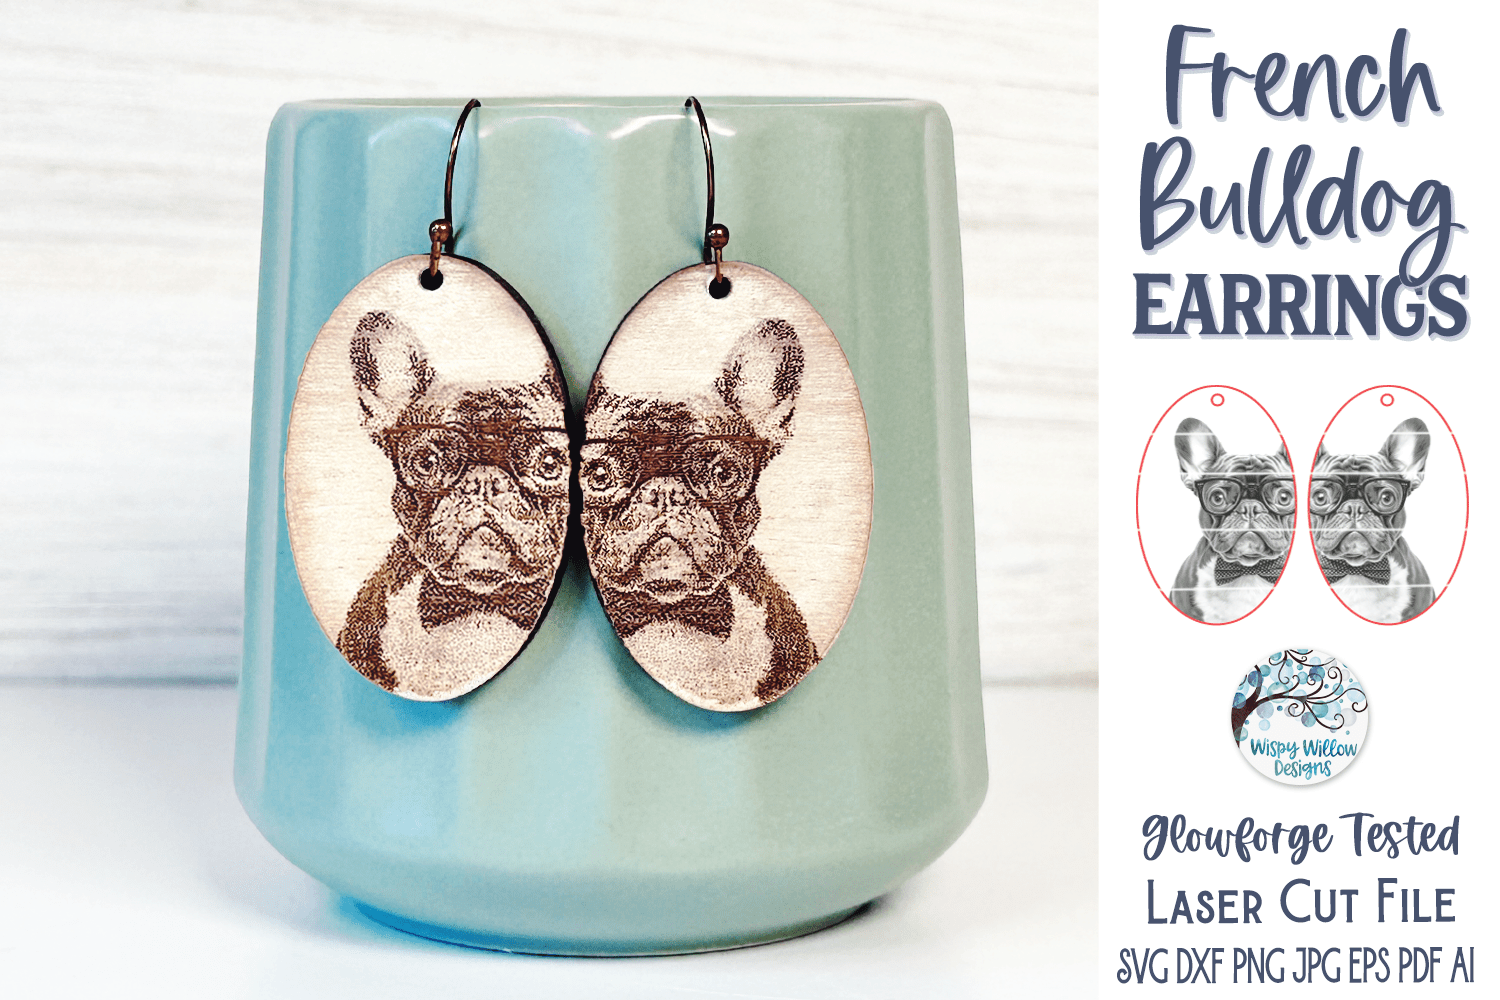 French Bulldog with Glasses Earring File for Glowforge or Laser Cutter Wispy Willow Designs Company